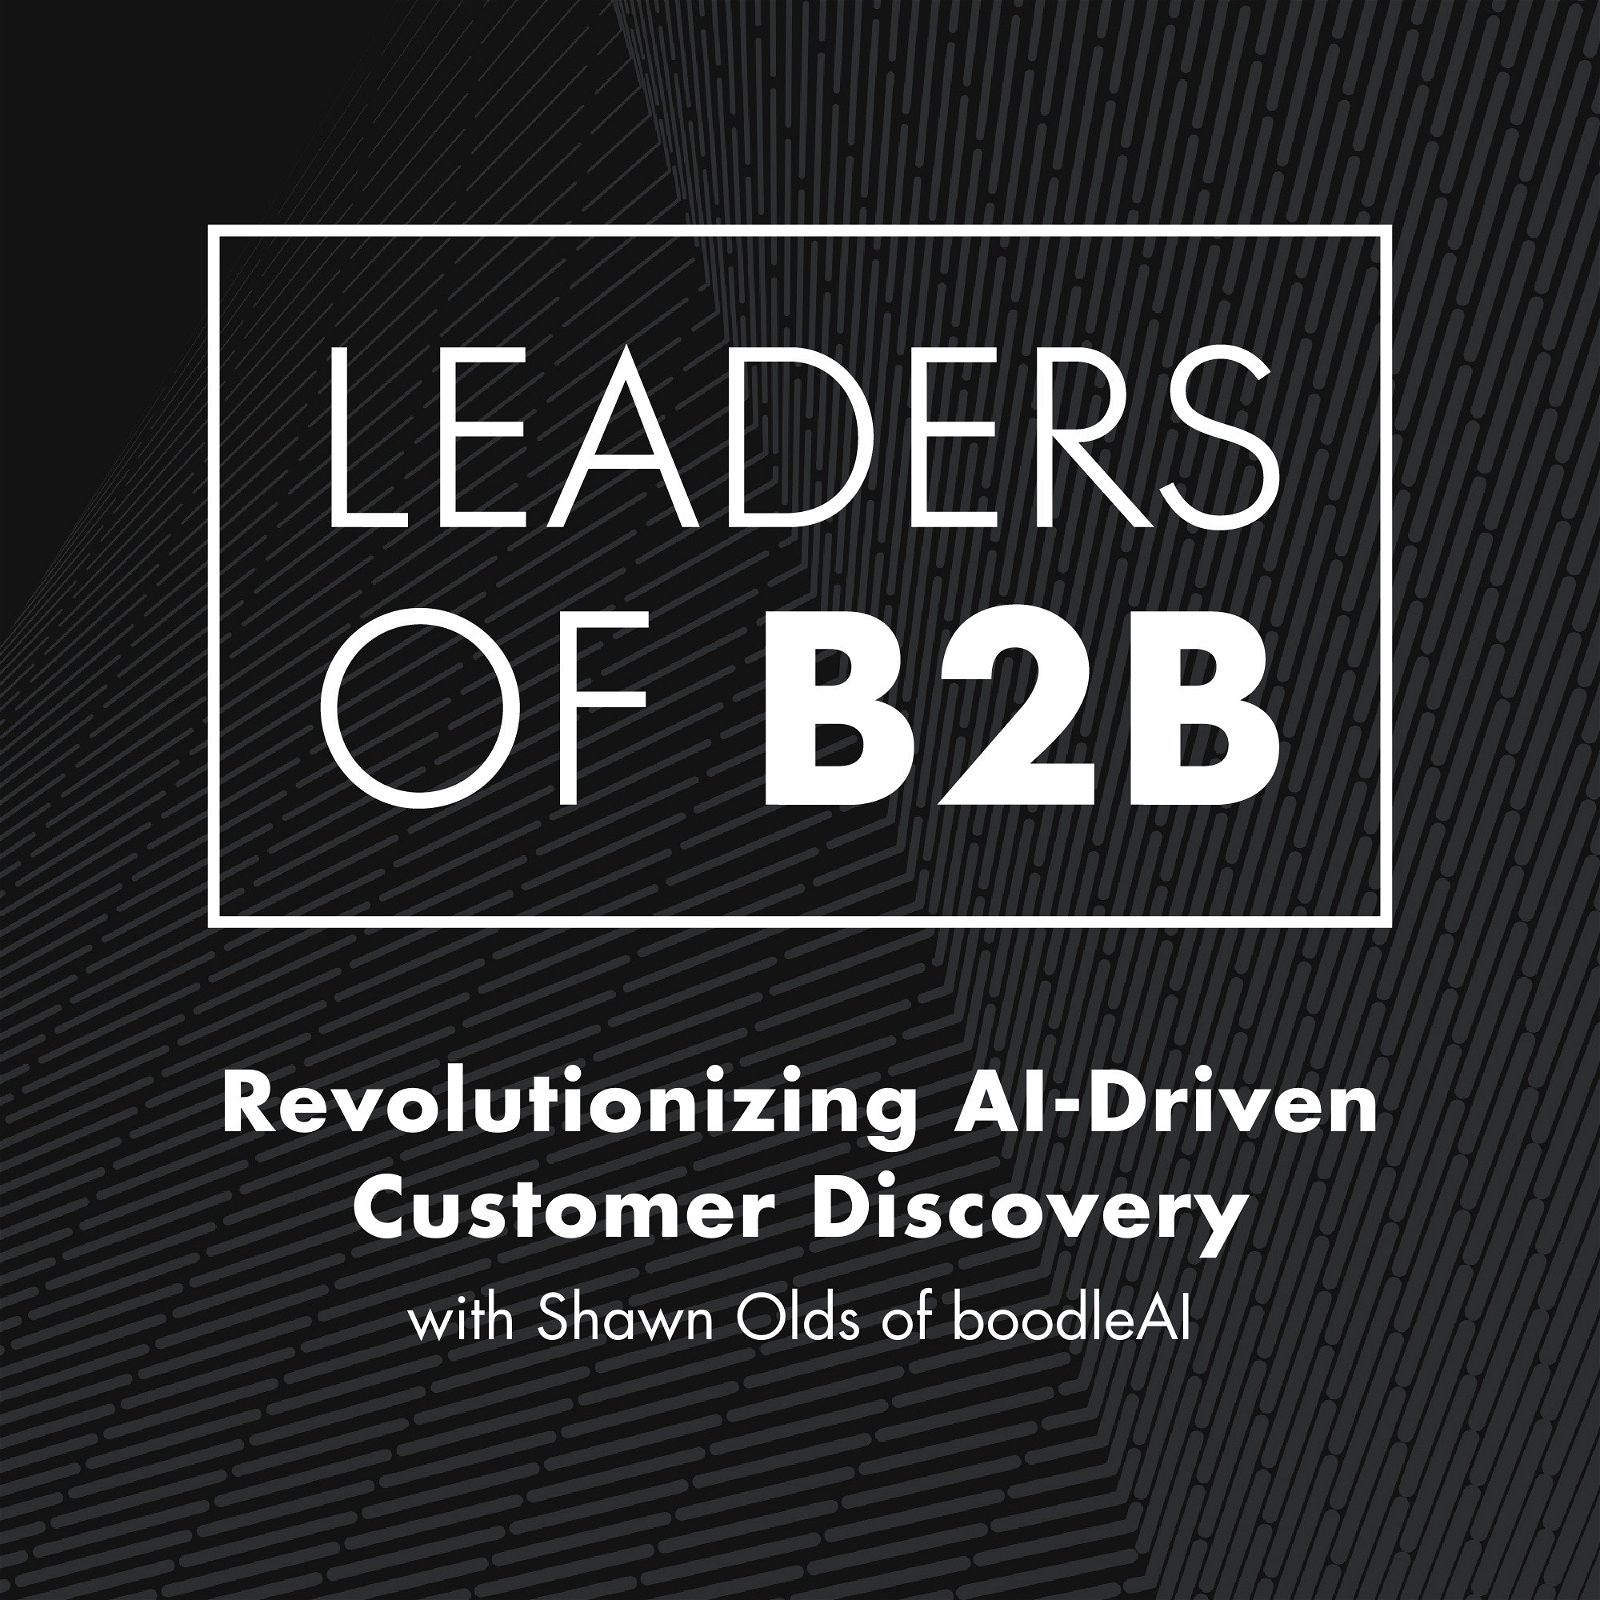 Revolutionizing AI-Driven Customer Discovery with Shawn Olds of boodleAI